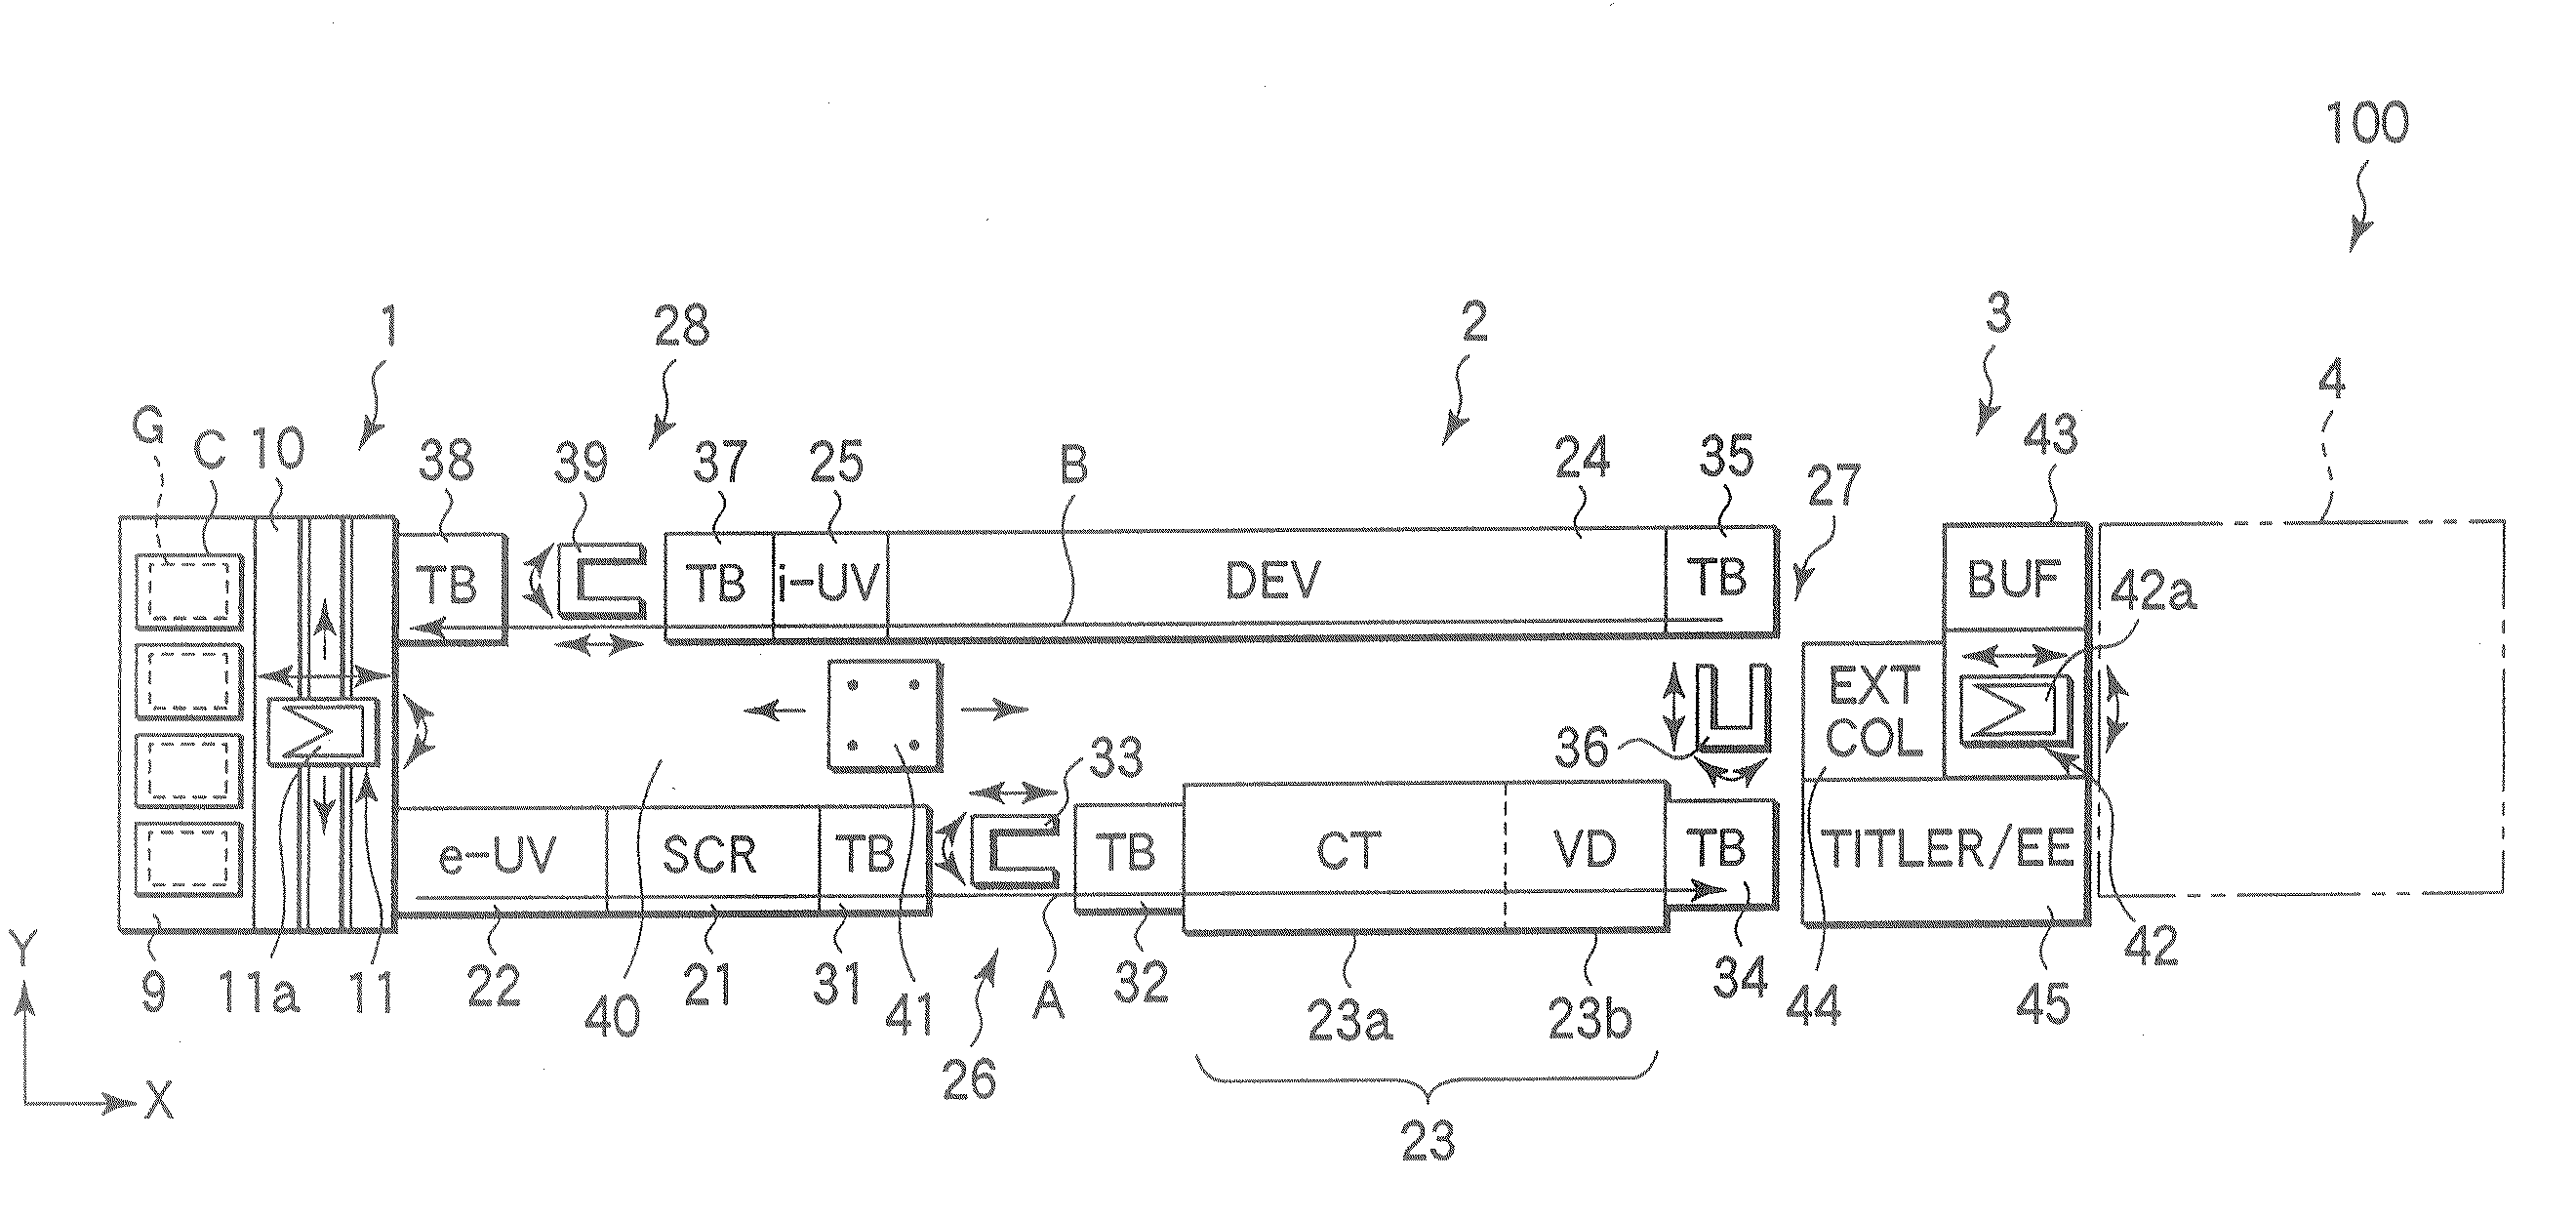 Stage apparatus and application processing apparatus